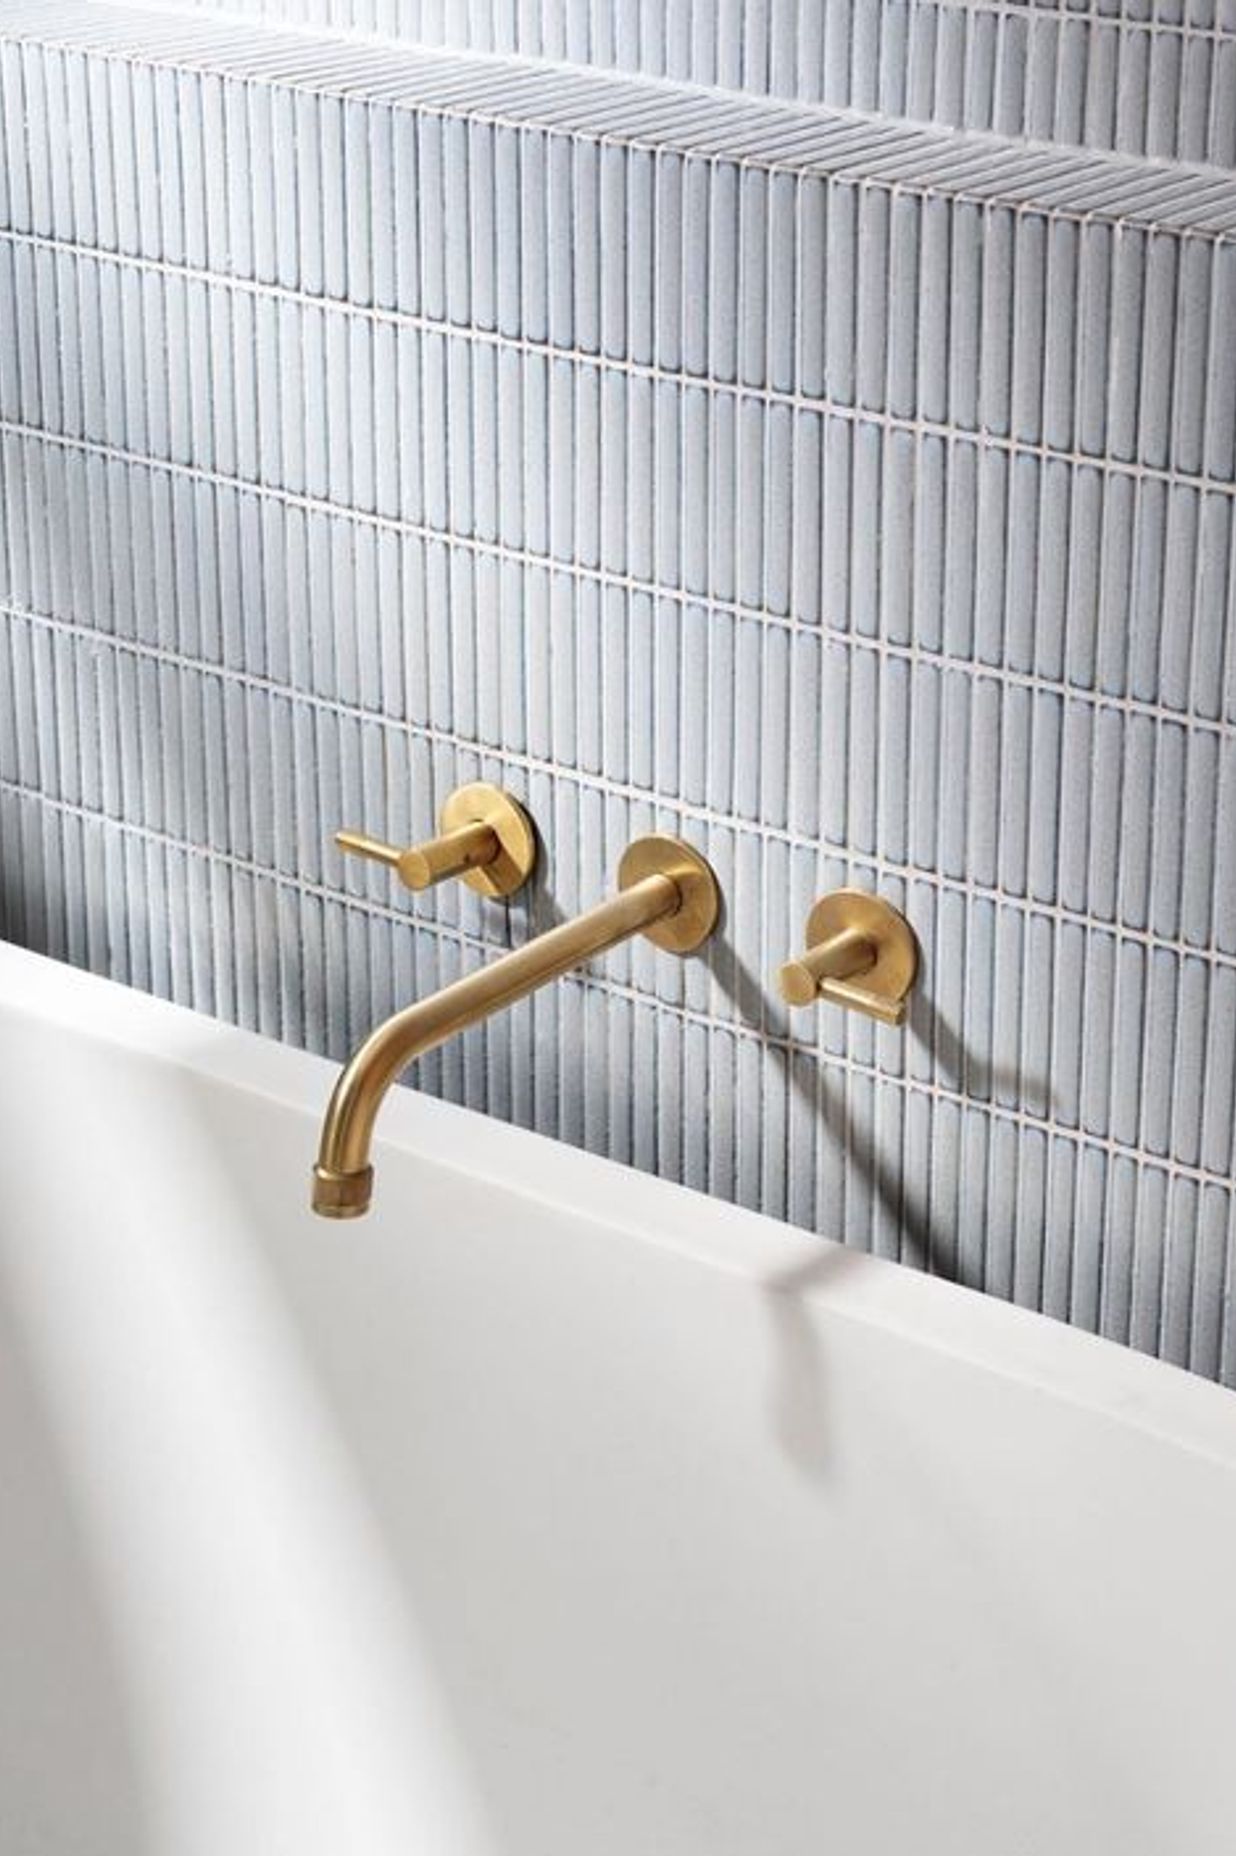 Mosaic finger tiles exude a Japandi design aesthetic – a celebration of clean lines and organic textures.